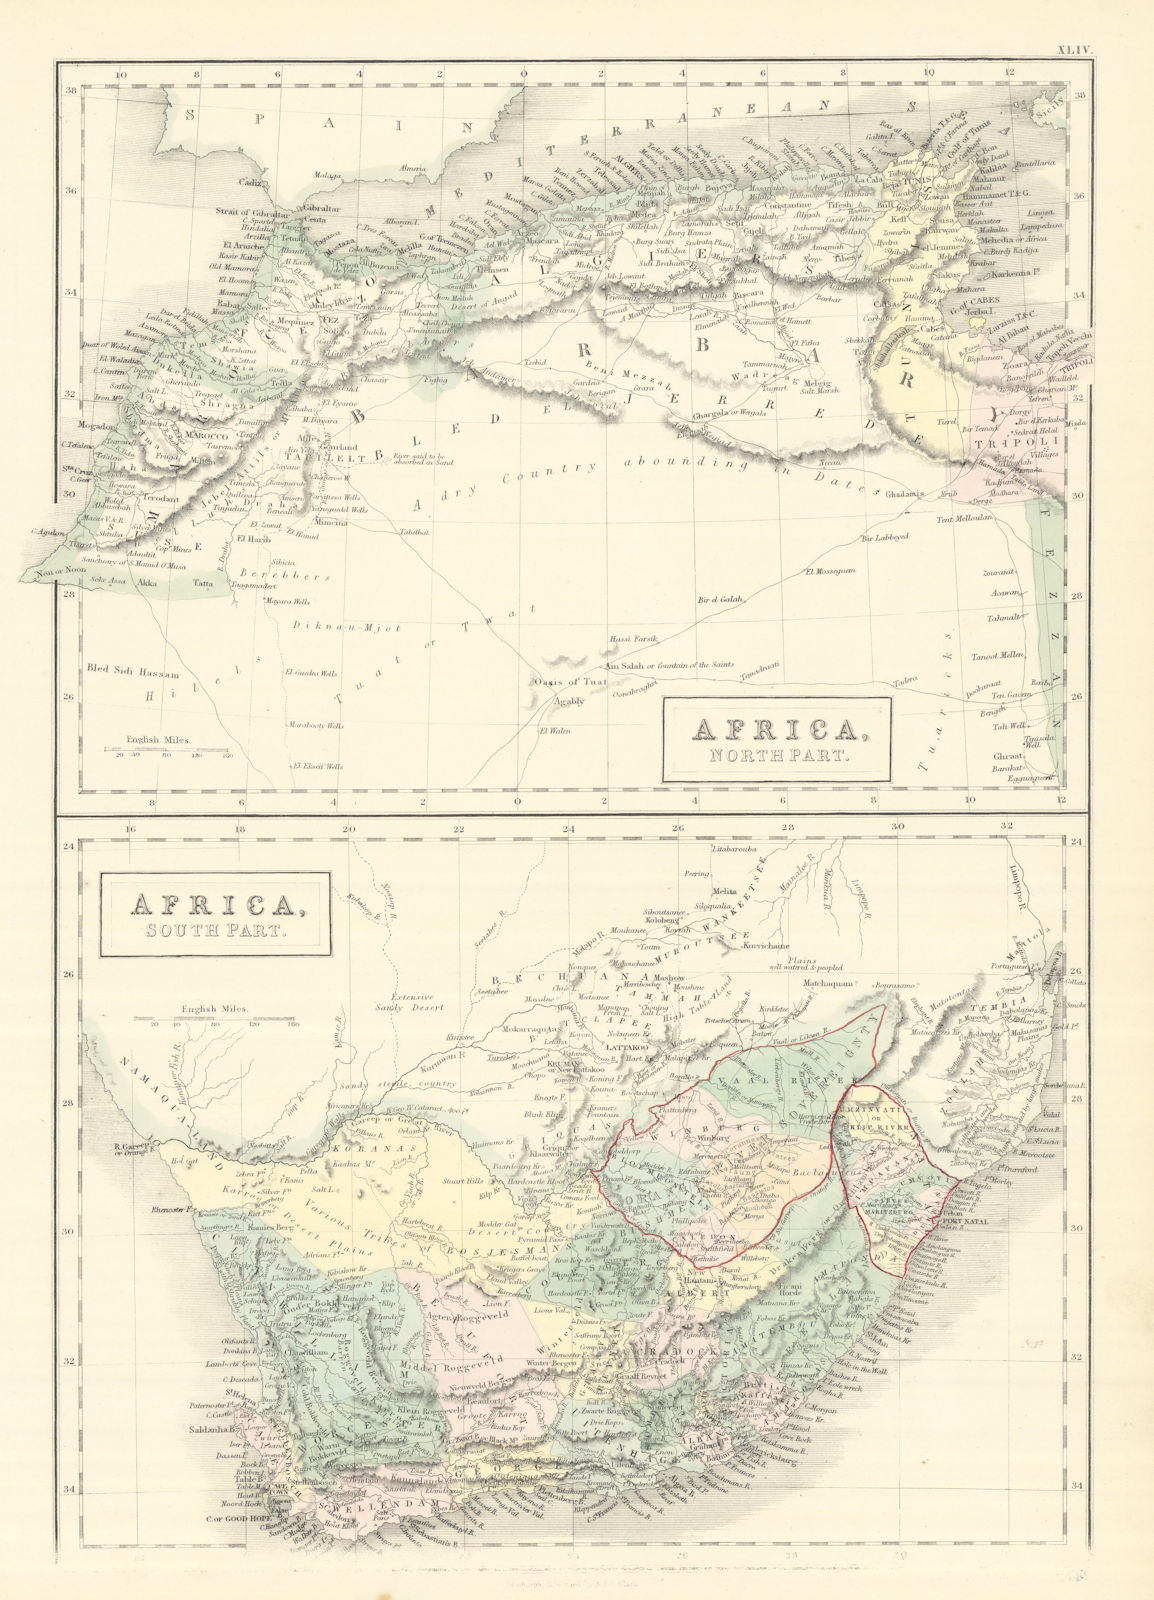 Northern & Southern Africa. Maghreb. Orange River Sovereignty. HALL 1854 map